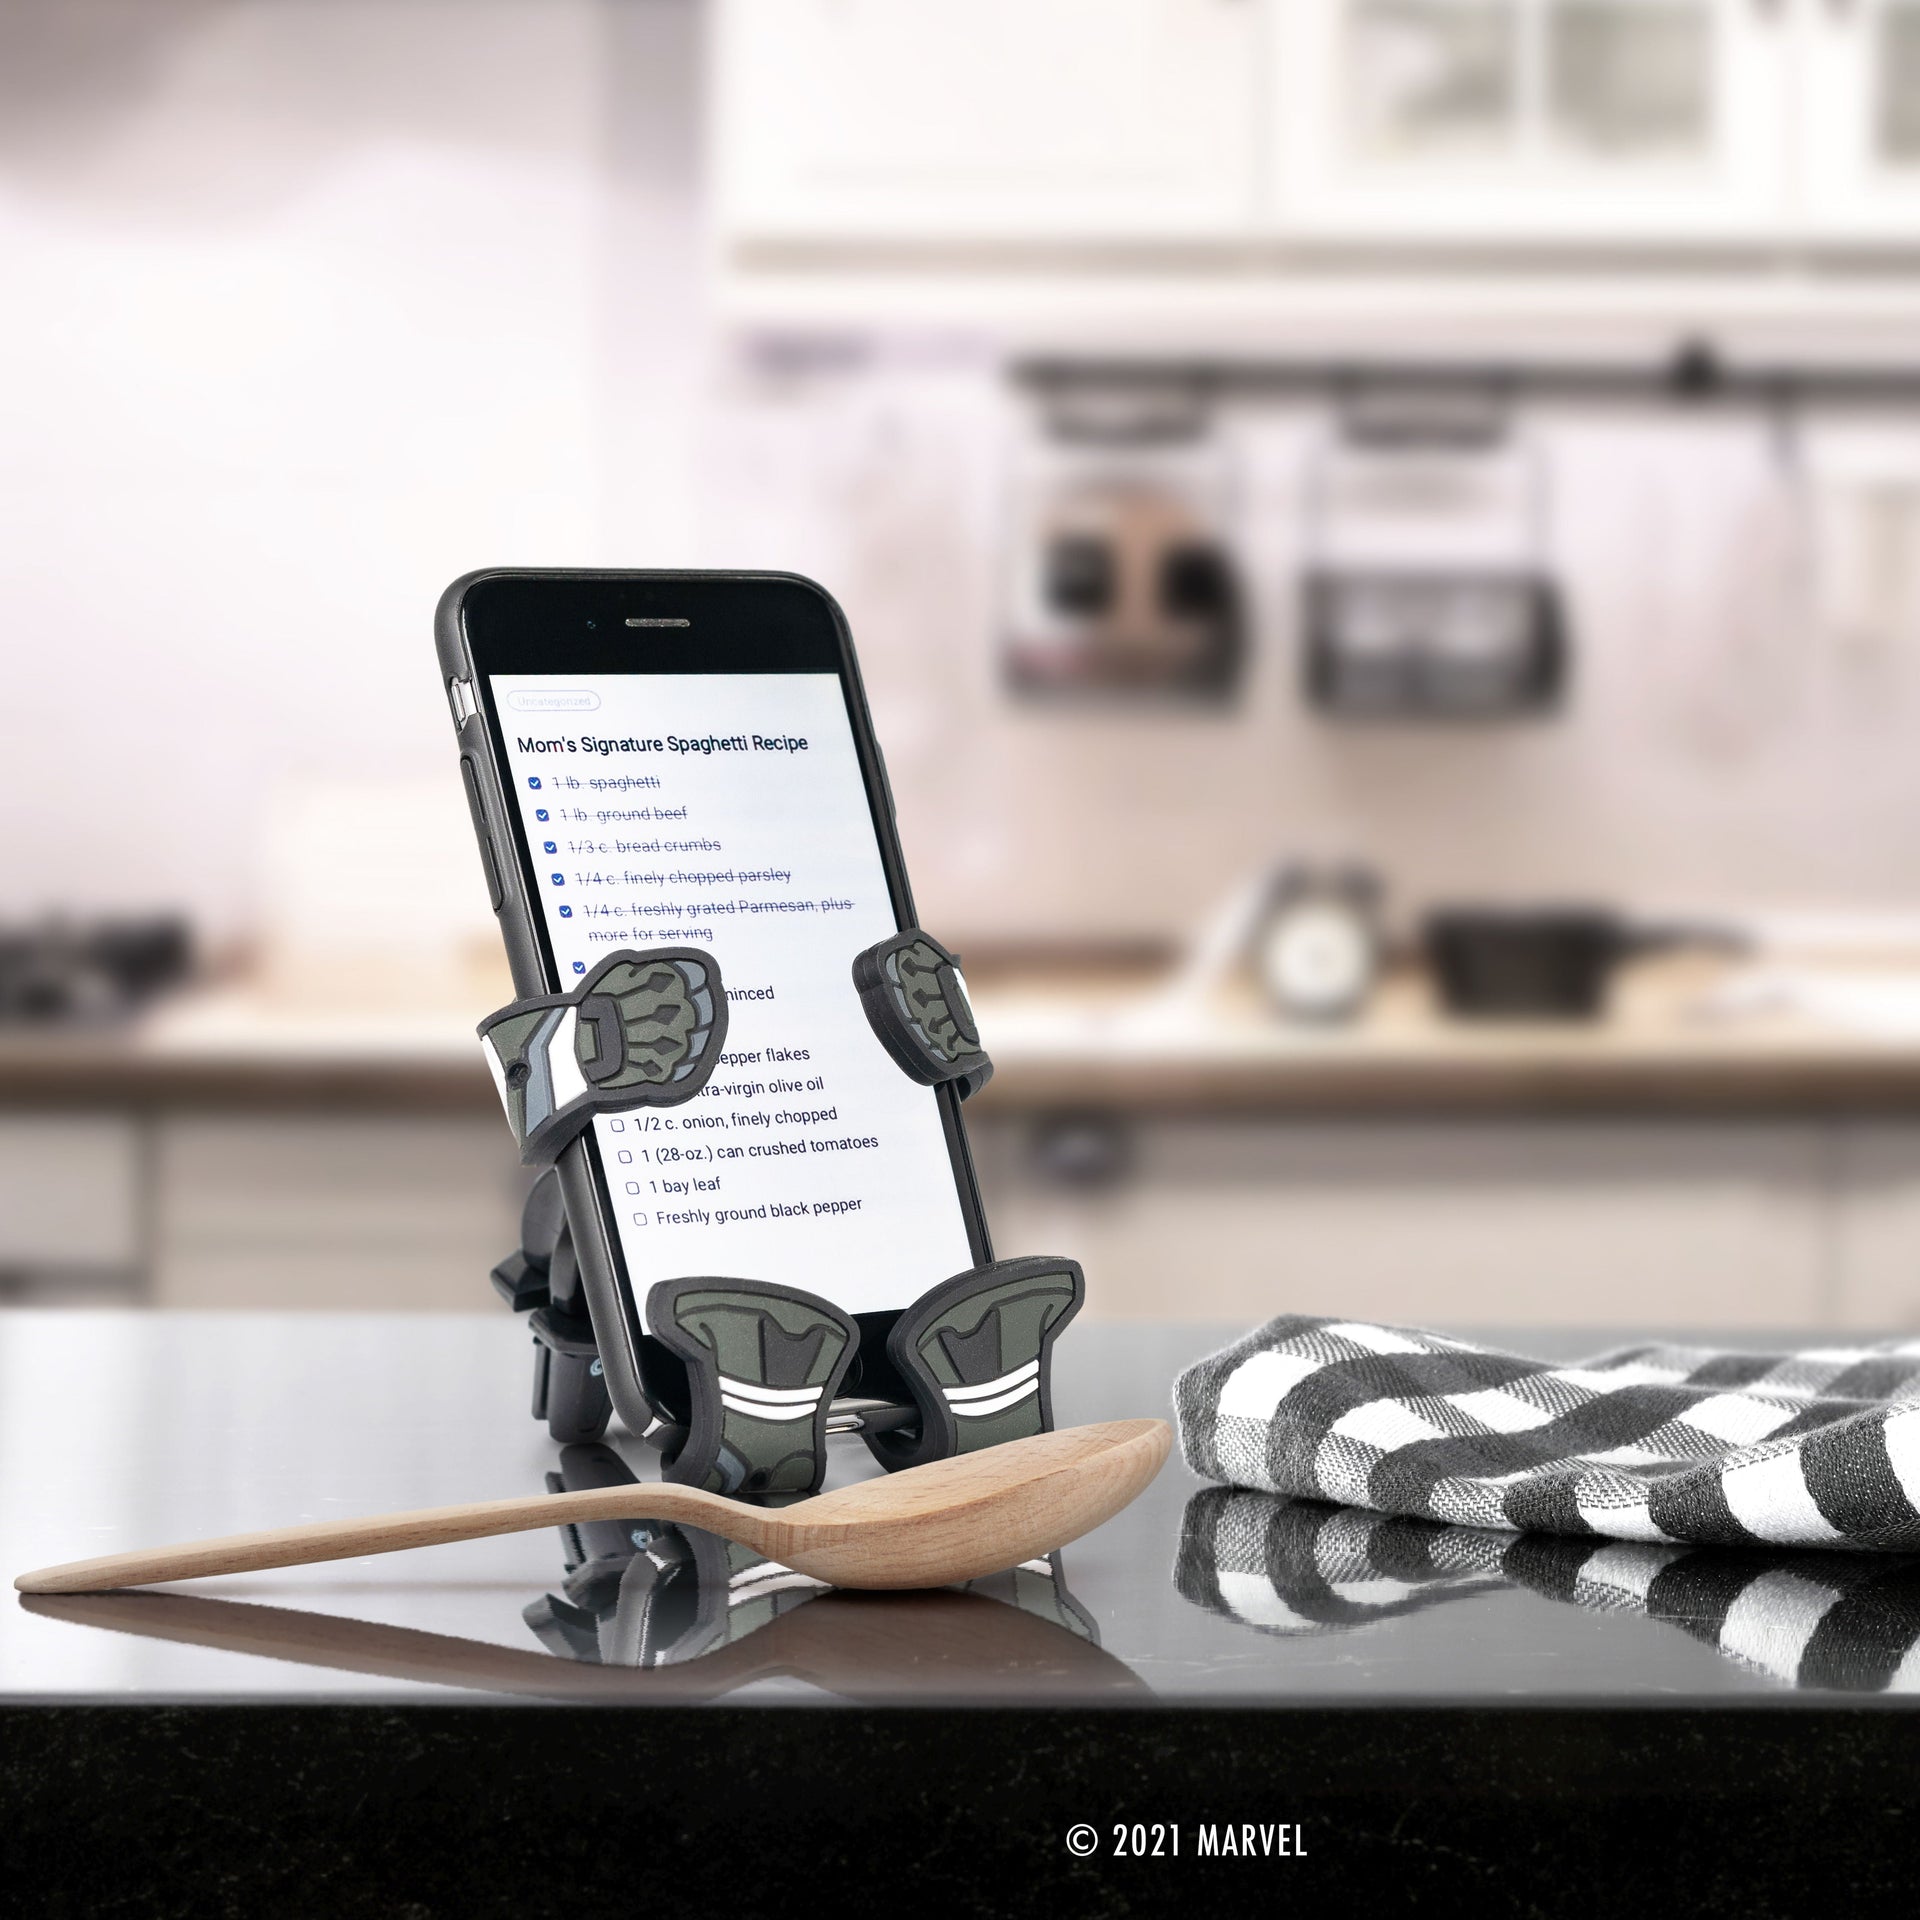 Image of Marvel Black Panther Hug Buddy holding a cell-phone while sitting on a kitchen counter, displaying a recipe on the phone screen.